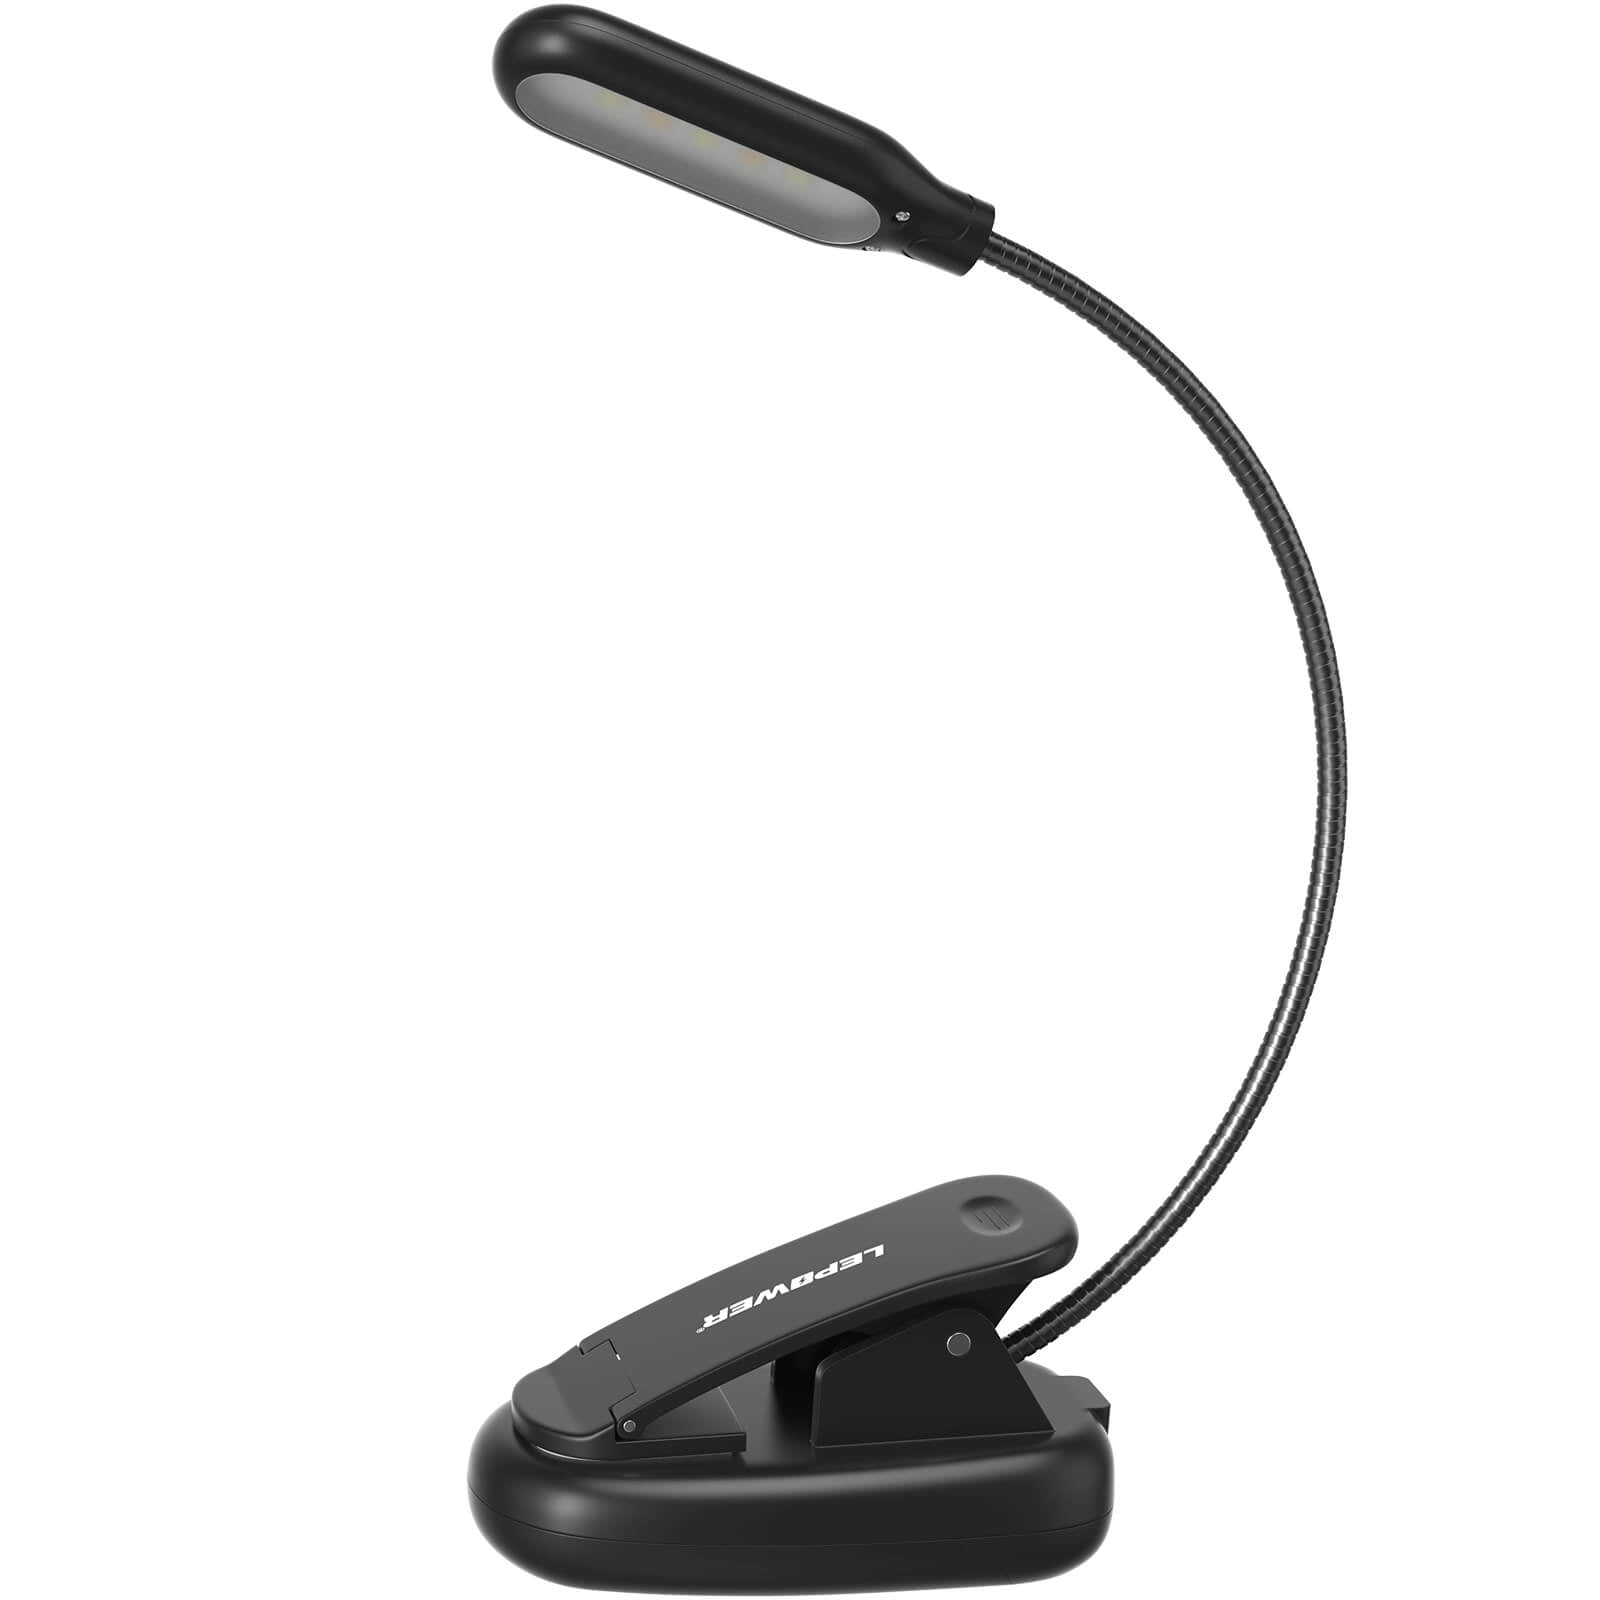 Lepower Portable Clip on Book Light, Battery & USB Operated Reading Lamp